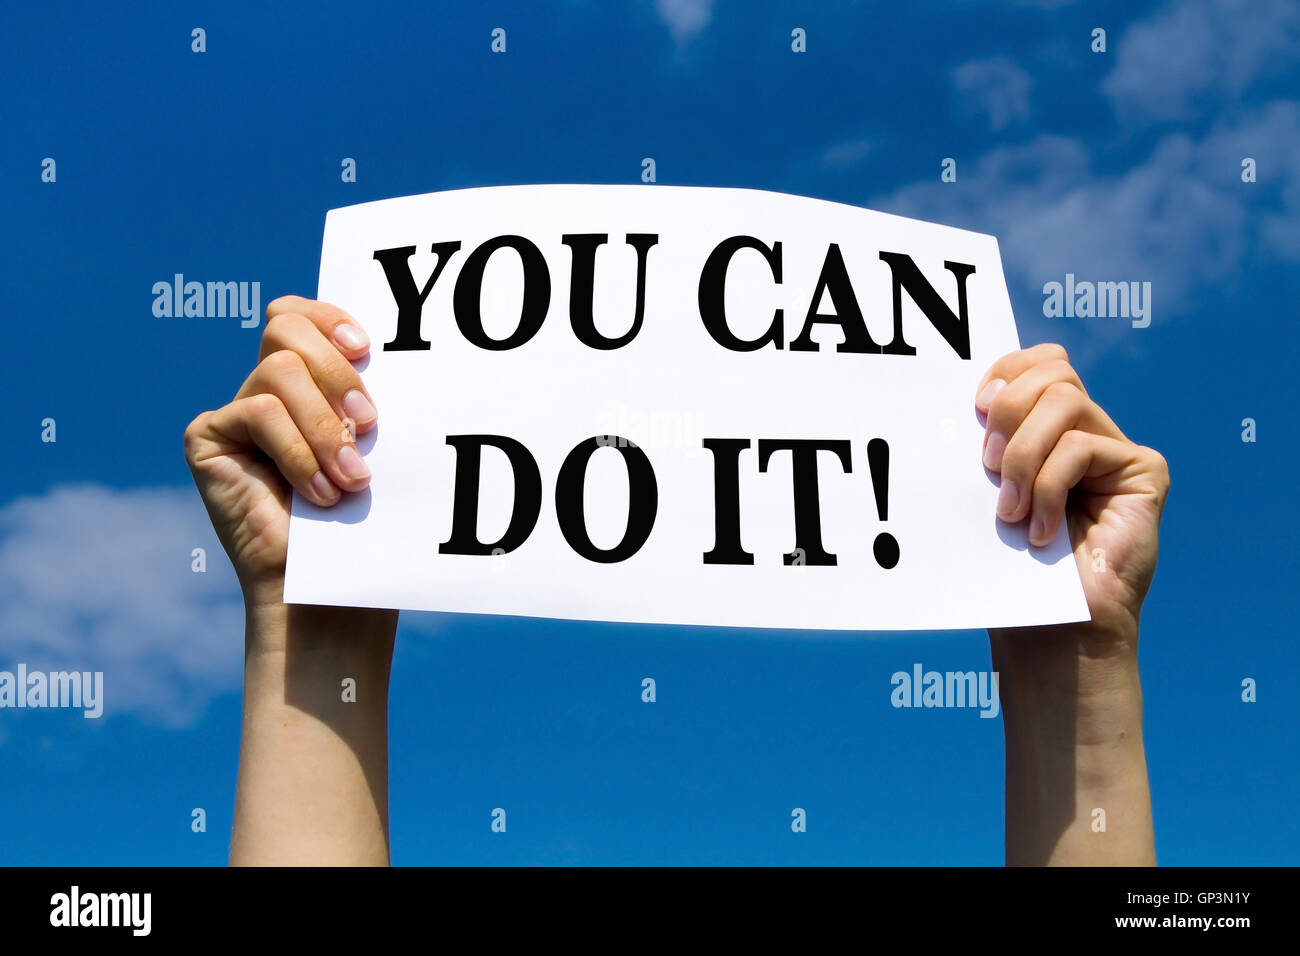 you can do it, motivational sign Stock Photo